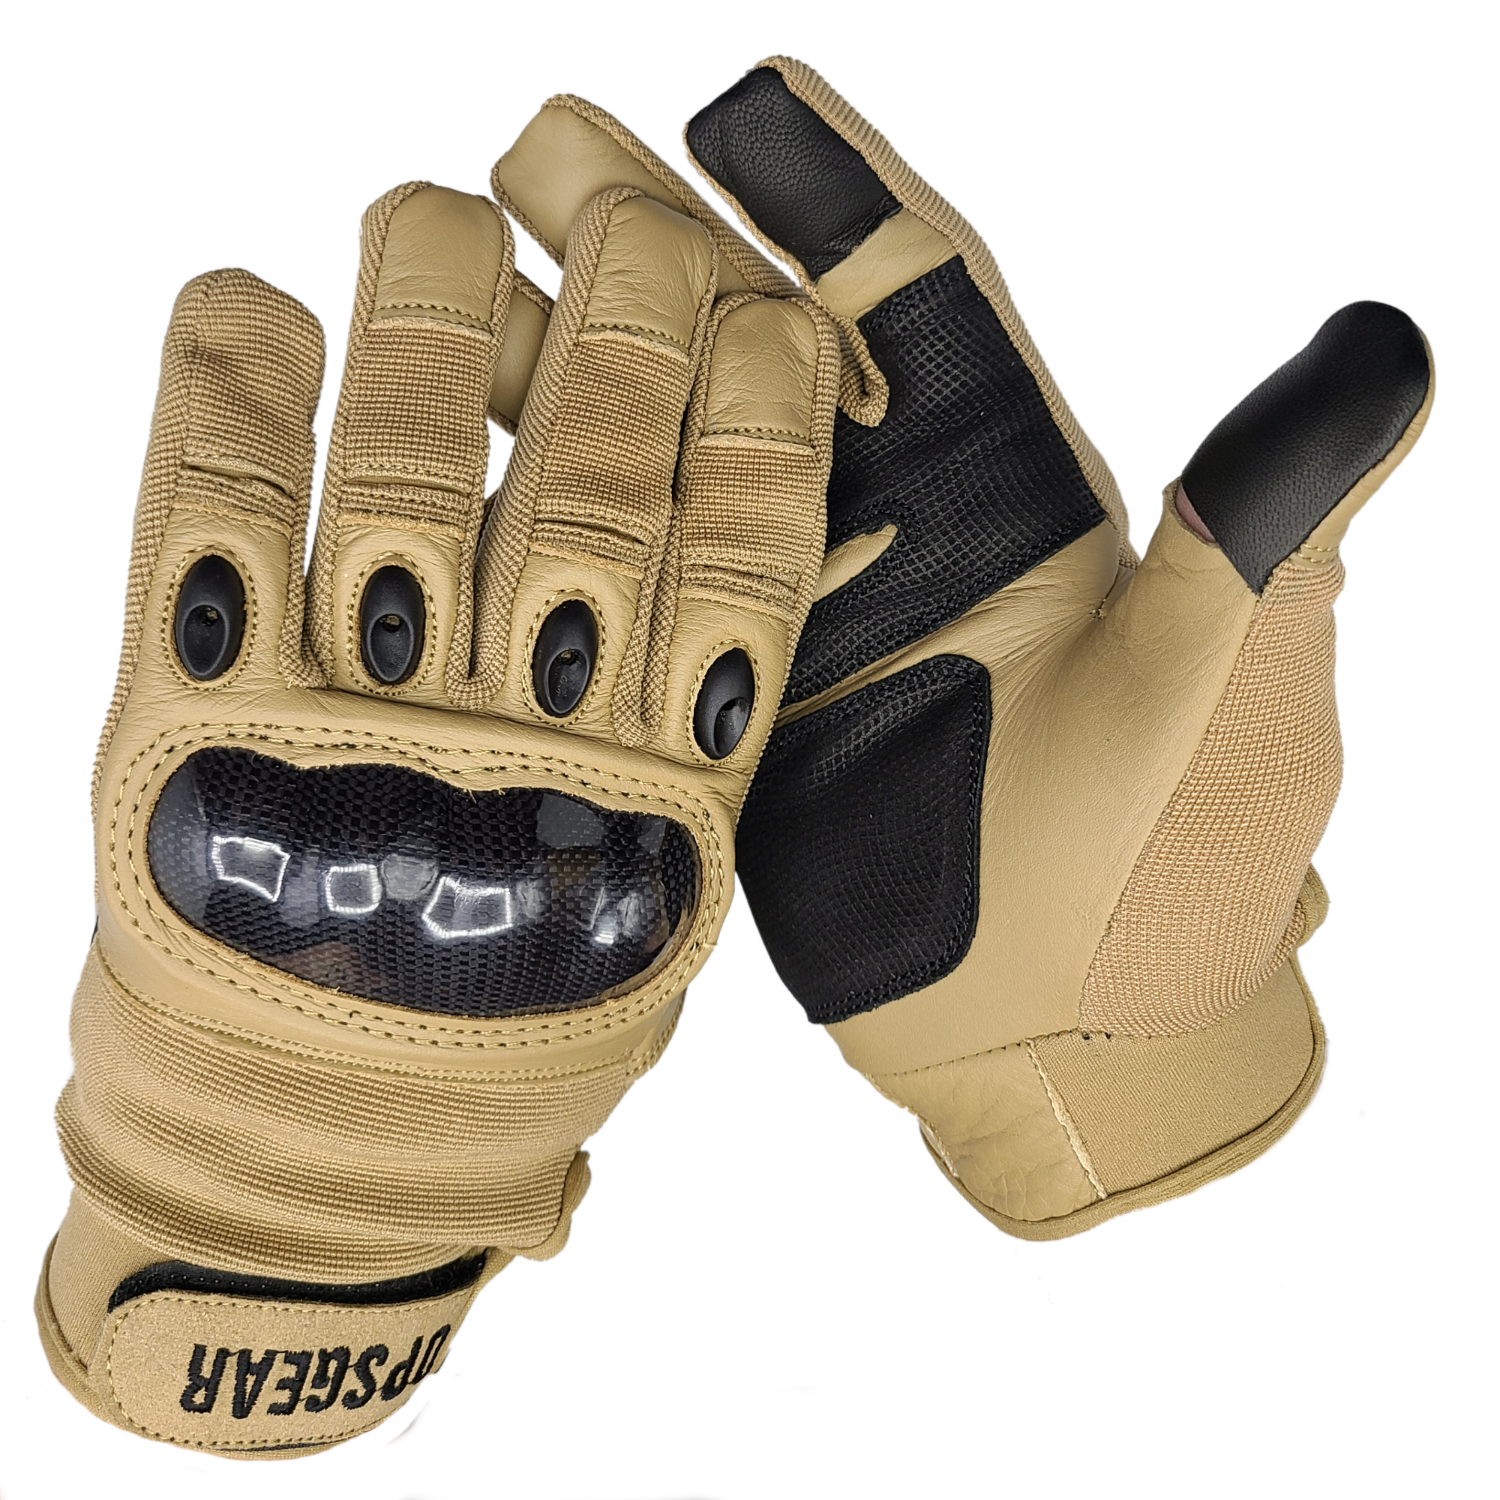 SHARK GUANTES COLD COMBAT KEVLAR - Coyote - S - Airsoft Defence